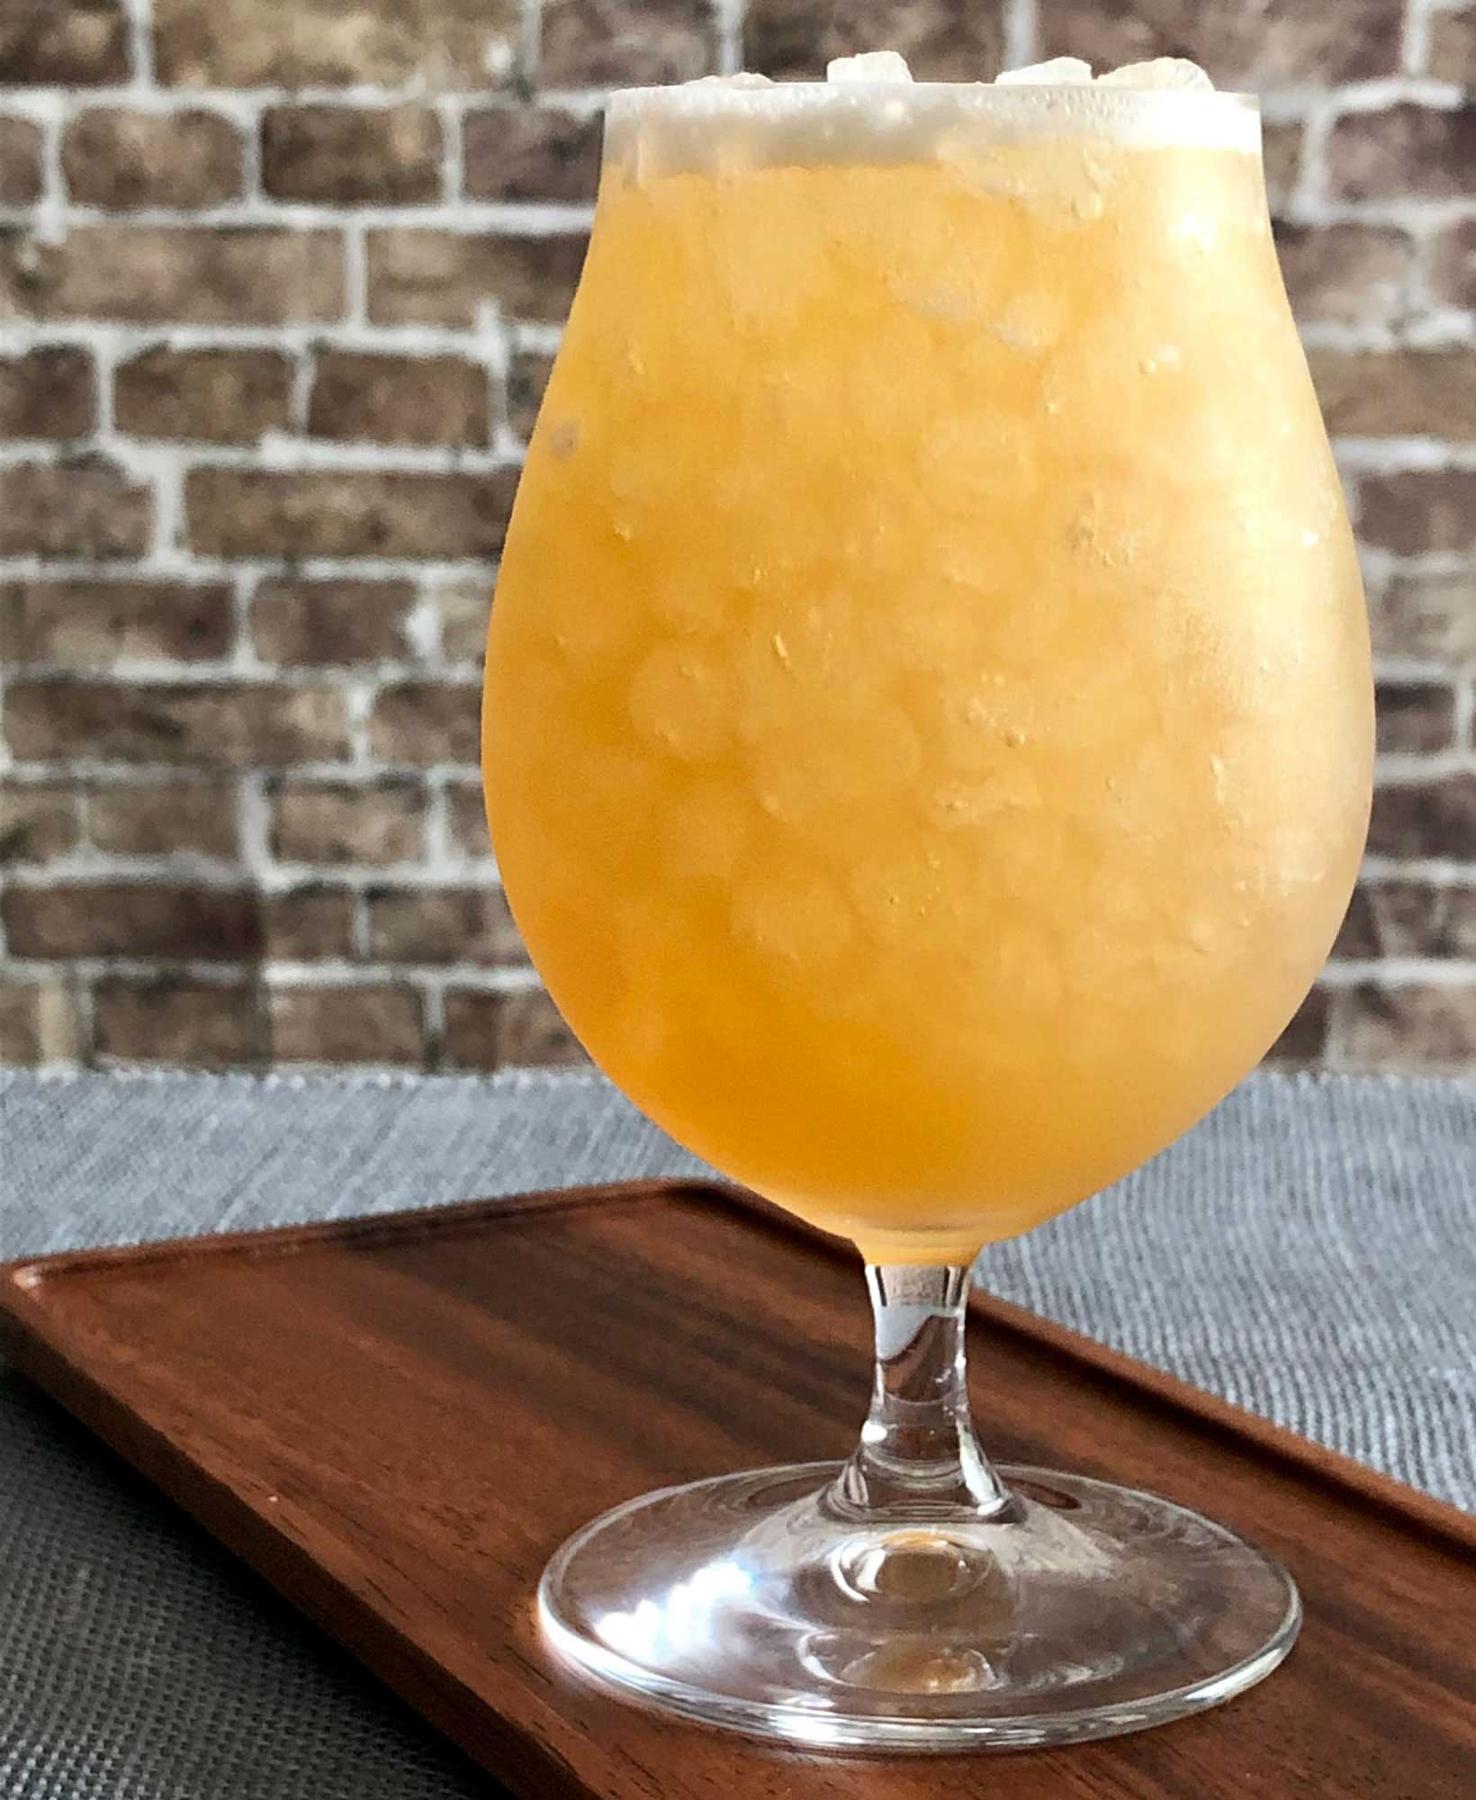 An example of the Sawbuck, the mixed drink (drink), by Kirkland Tap & Trotter, Cambridge, MA, featuring india pale ale, rye whiskey, cinnamon-infused sugar syrup, lemon juice, Nux Alpina Walnut Liqueur, and lump of cracked ice; photo by Lee Edwards